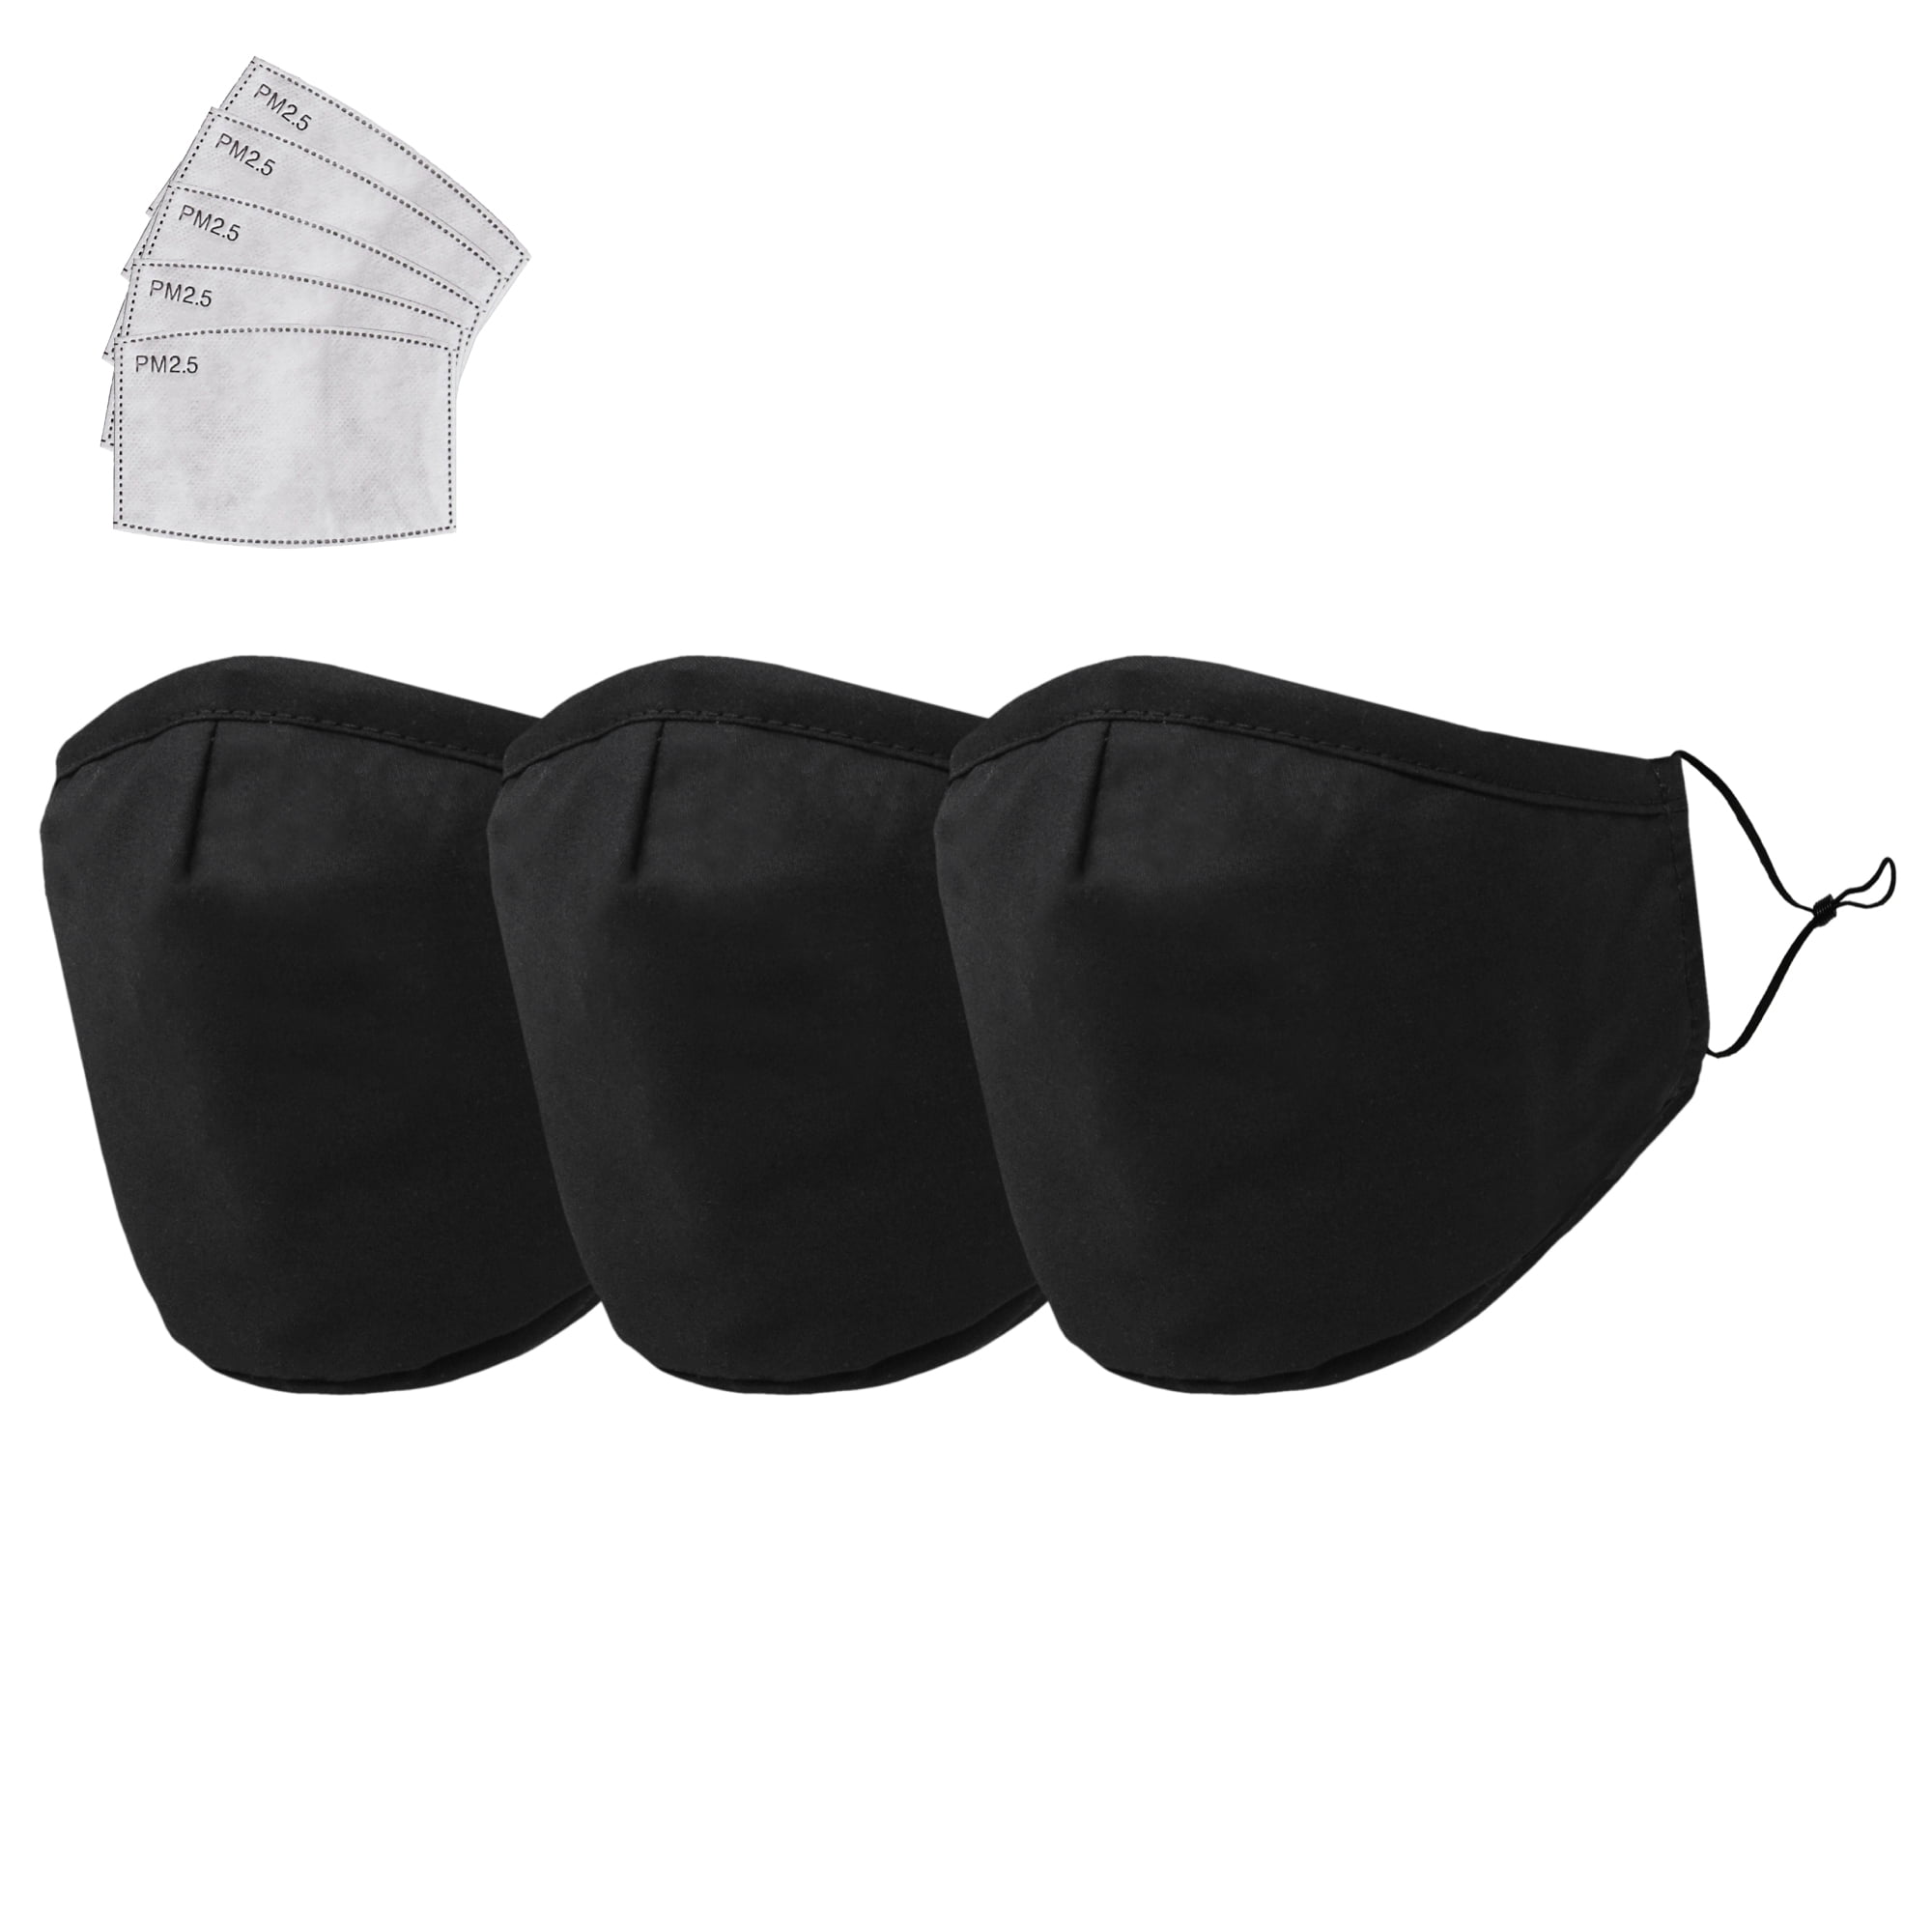 Soft Breathable 2 layers Black Fabric Face Mask with Mesh Liner/Filter Pocket 